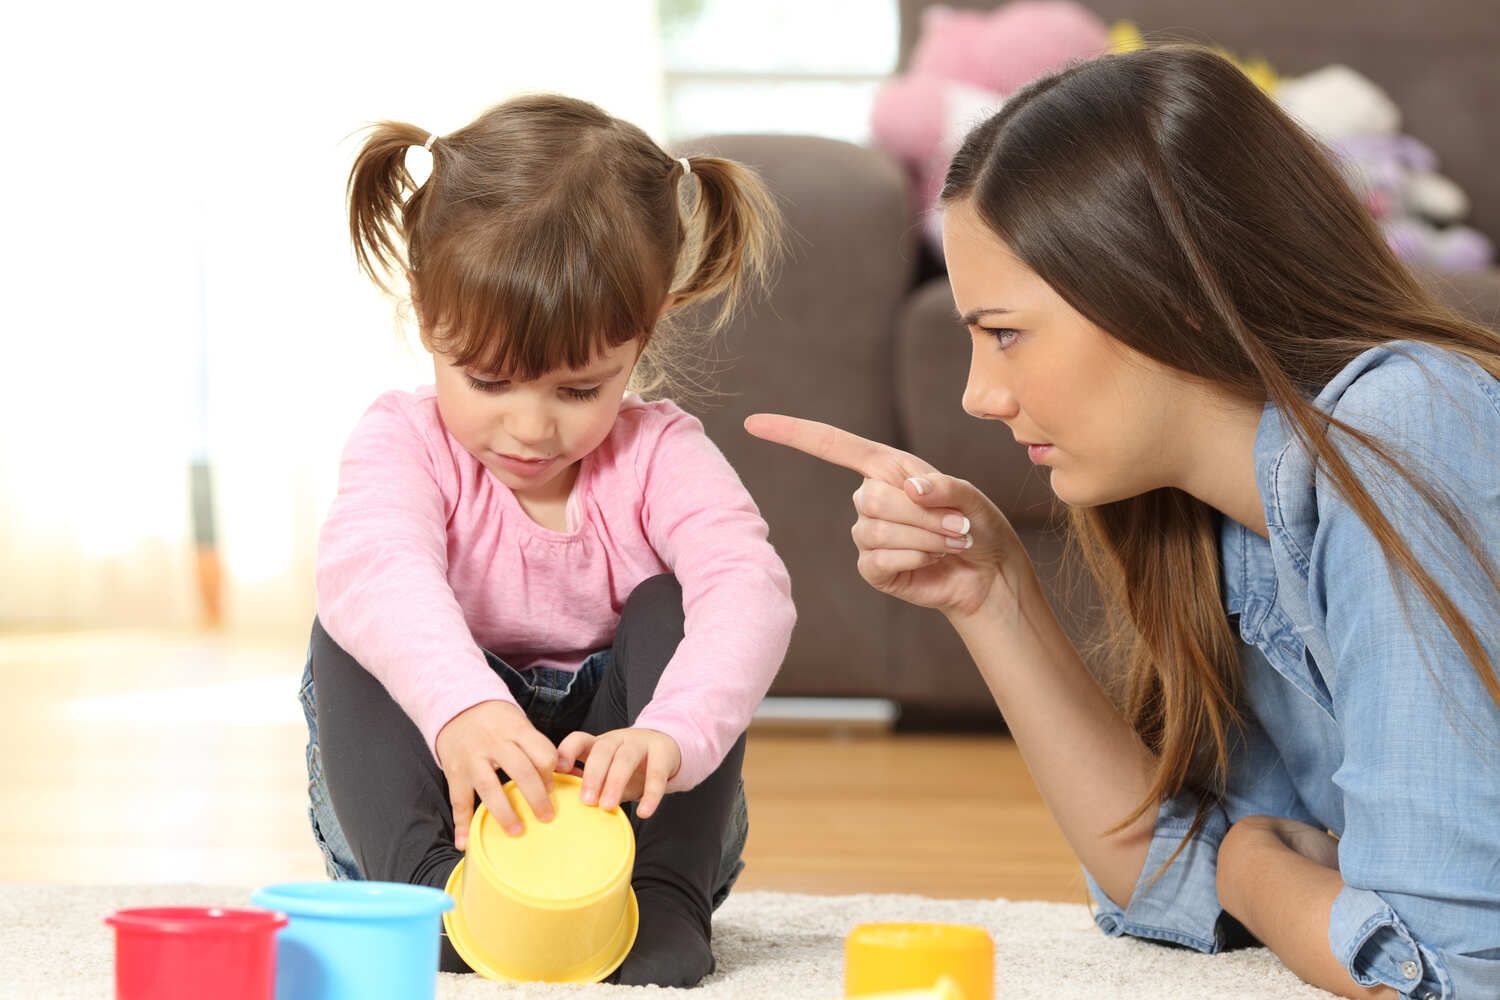 Parental control can lead to anger in toddlers